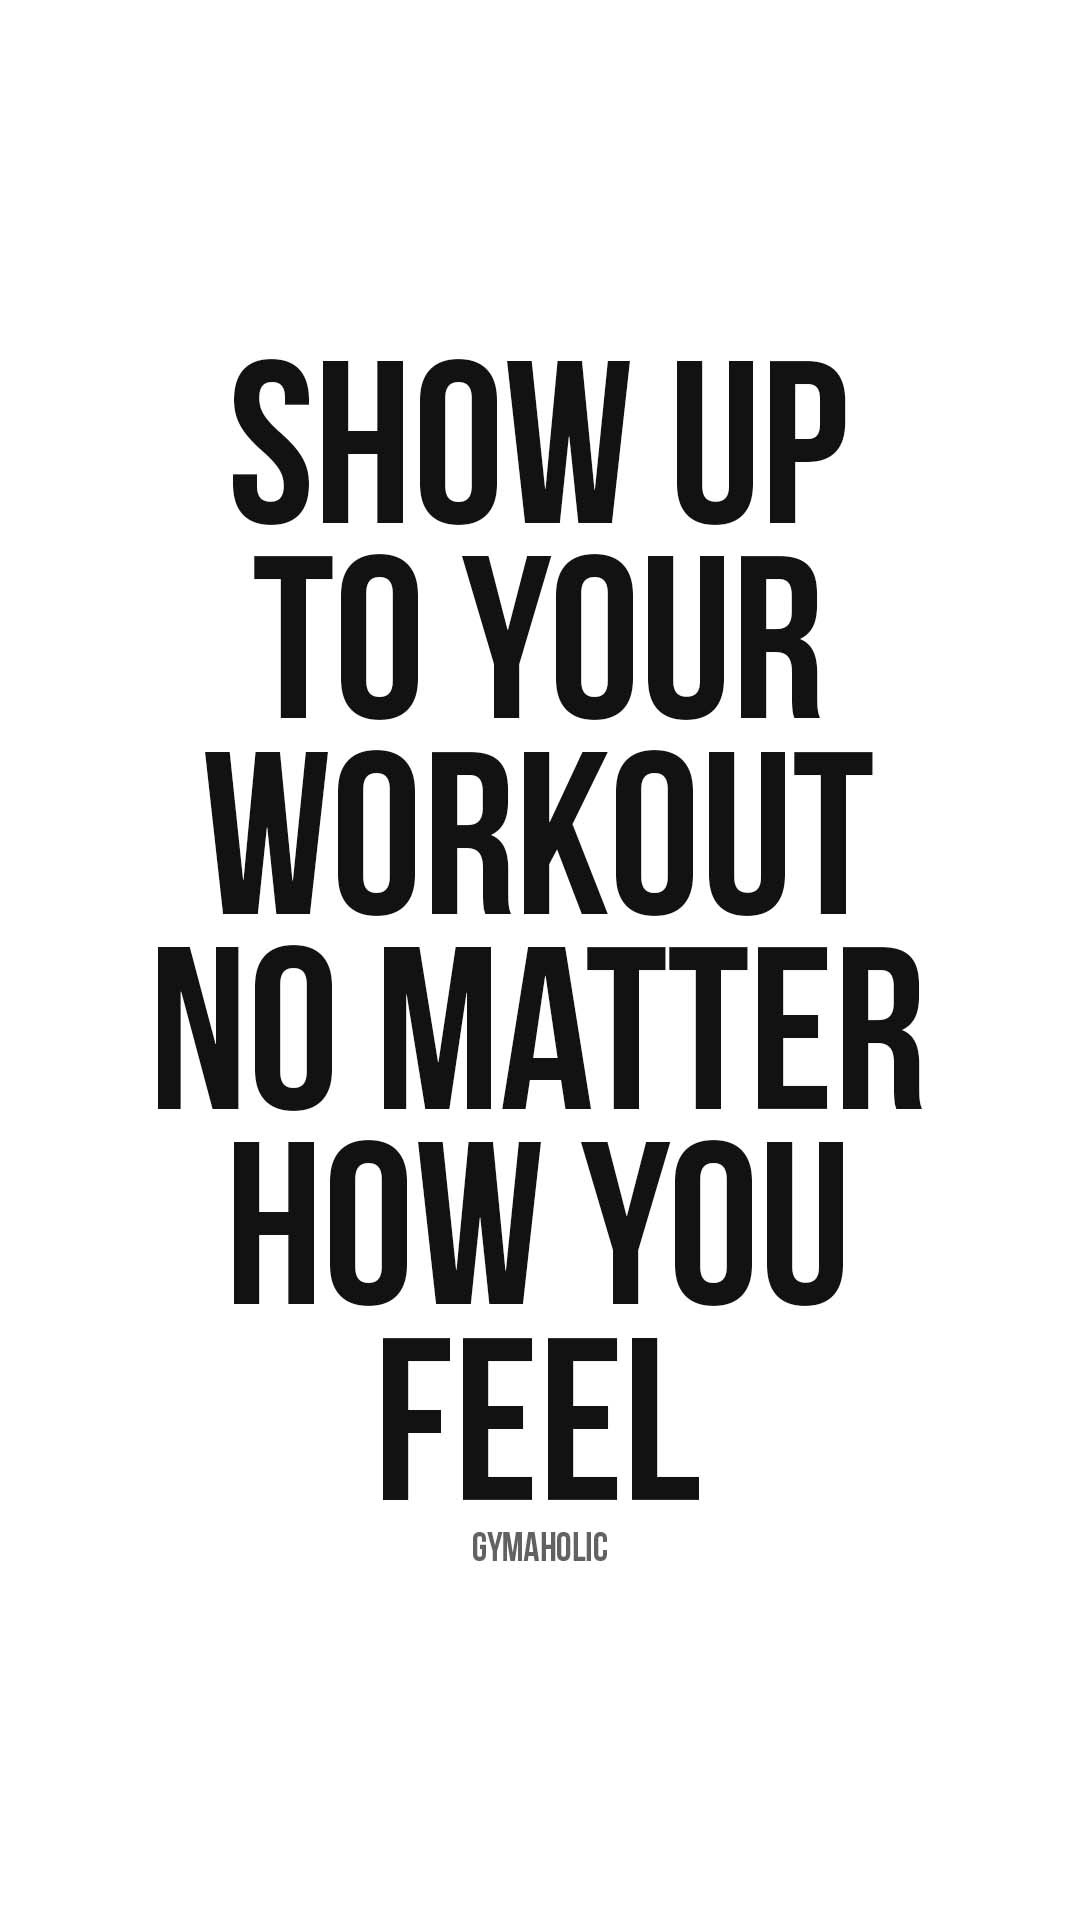 Show up to your workout no matter how you feel